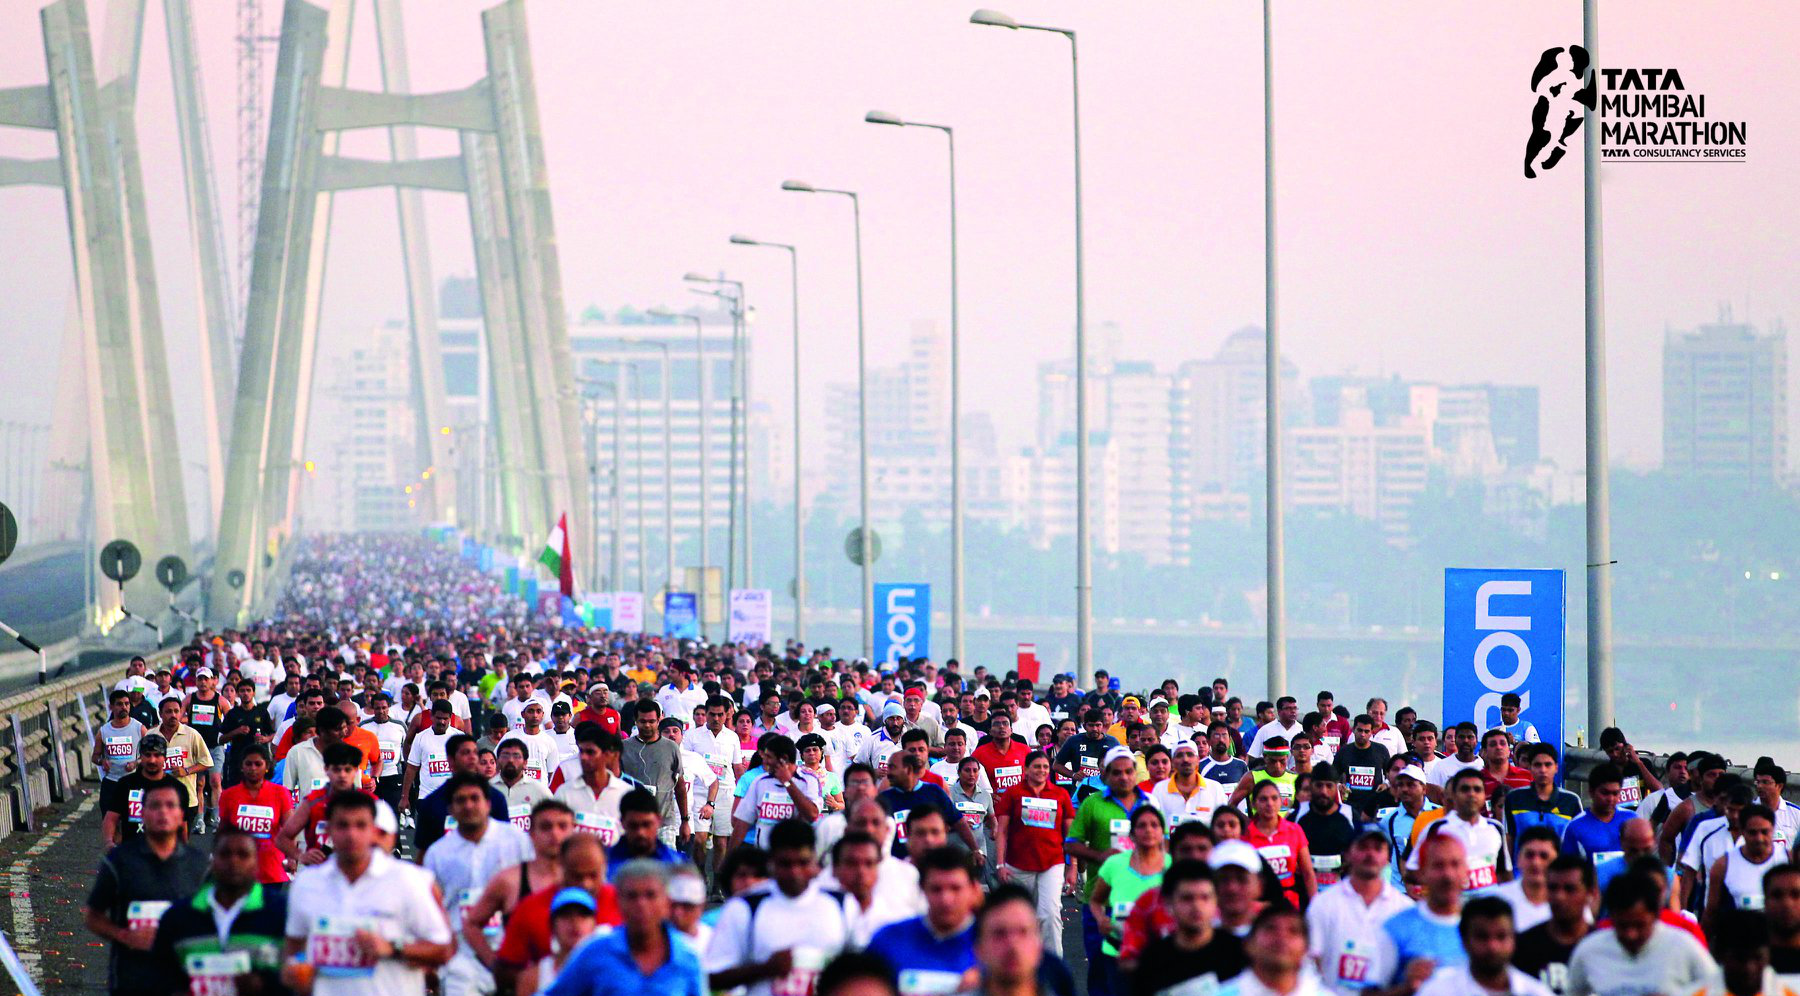 Every January, the Mumbai Marathon is held on the city's streets. A short drive from the best Hotels near Gateway of India.